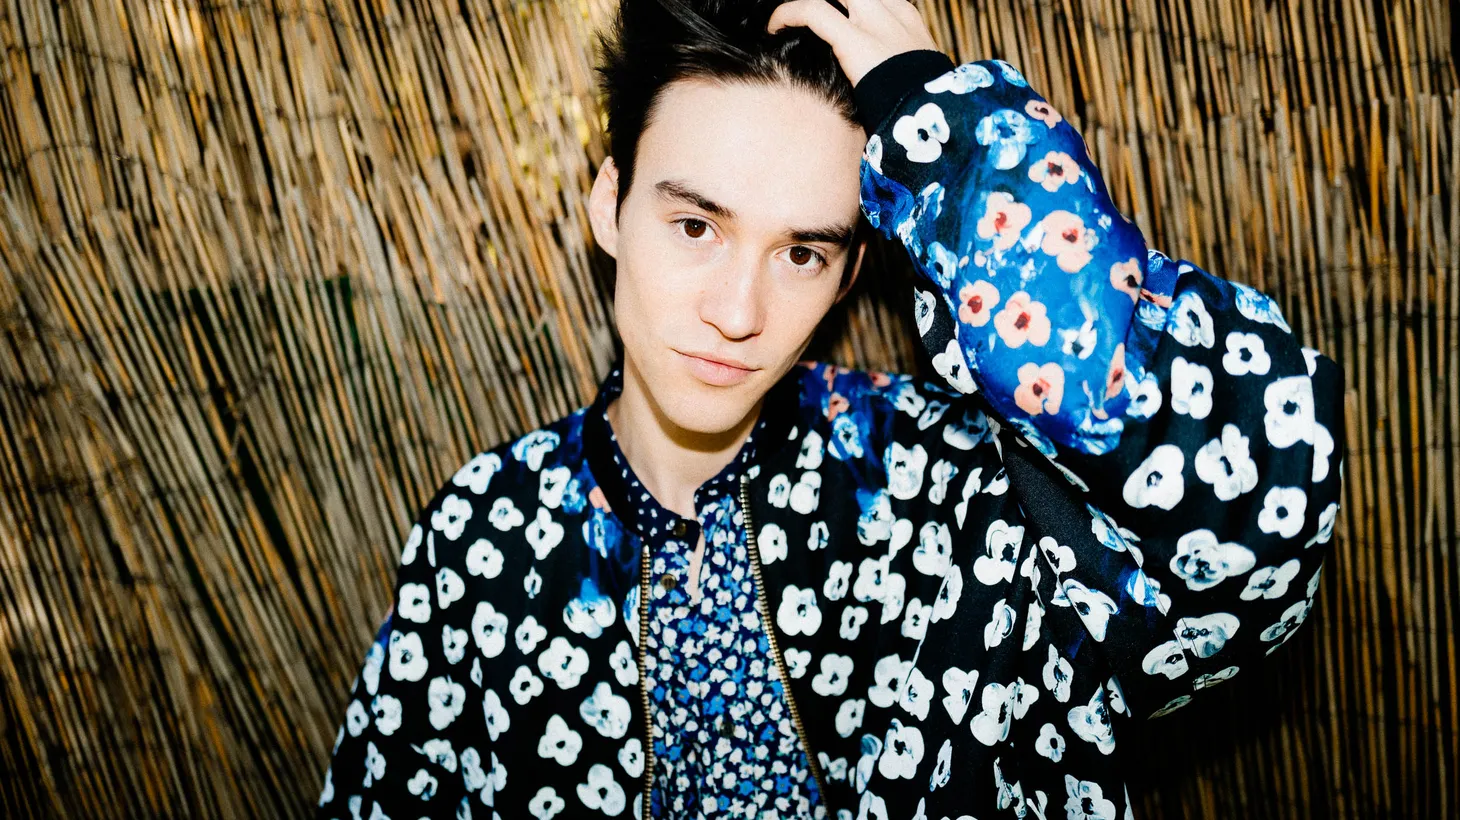 “There's something about everybody in the world having a voice that is entirely their own — it gives me goosebumps, it's very moving to me. And I think that knowing your own voice, in a musical sense, but also far outside of that, is one of the biggest and most profound things you can seek to do,” says musician Jacob Collier.